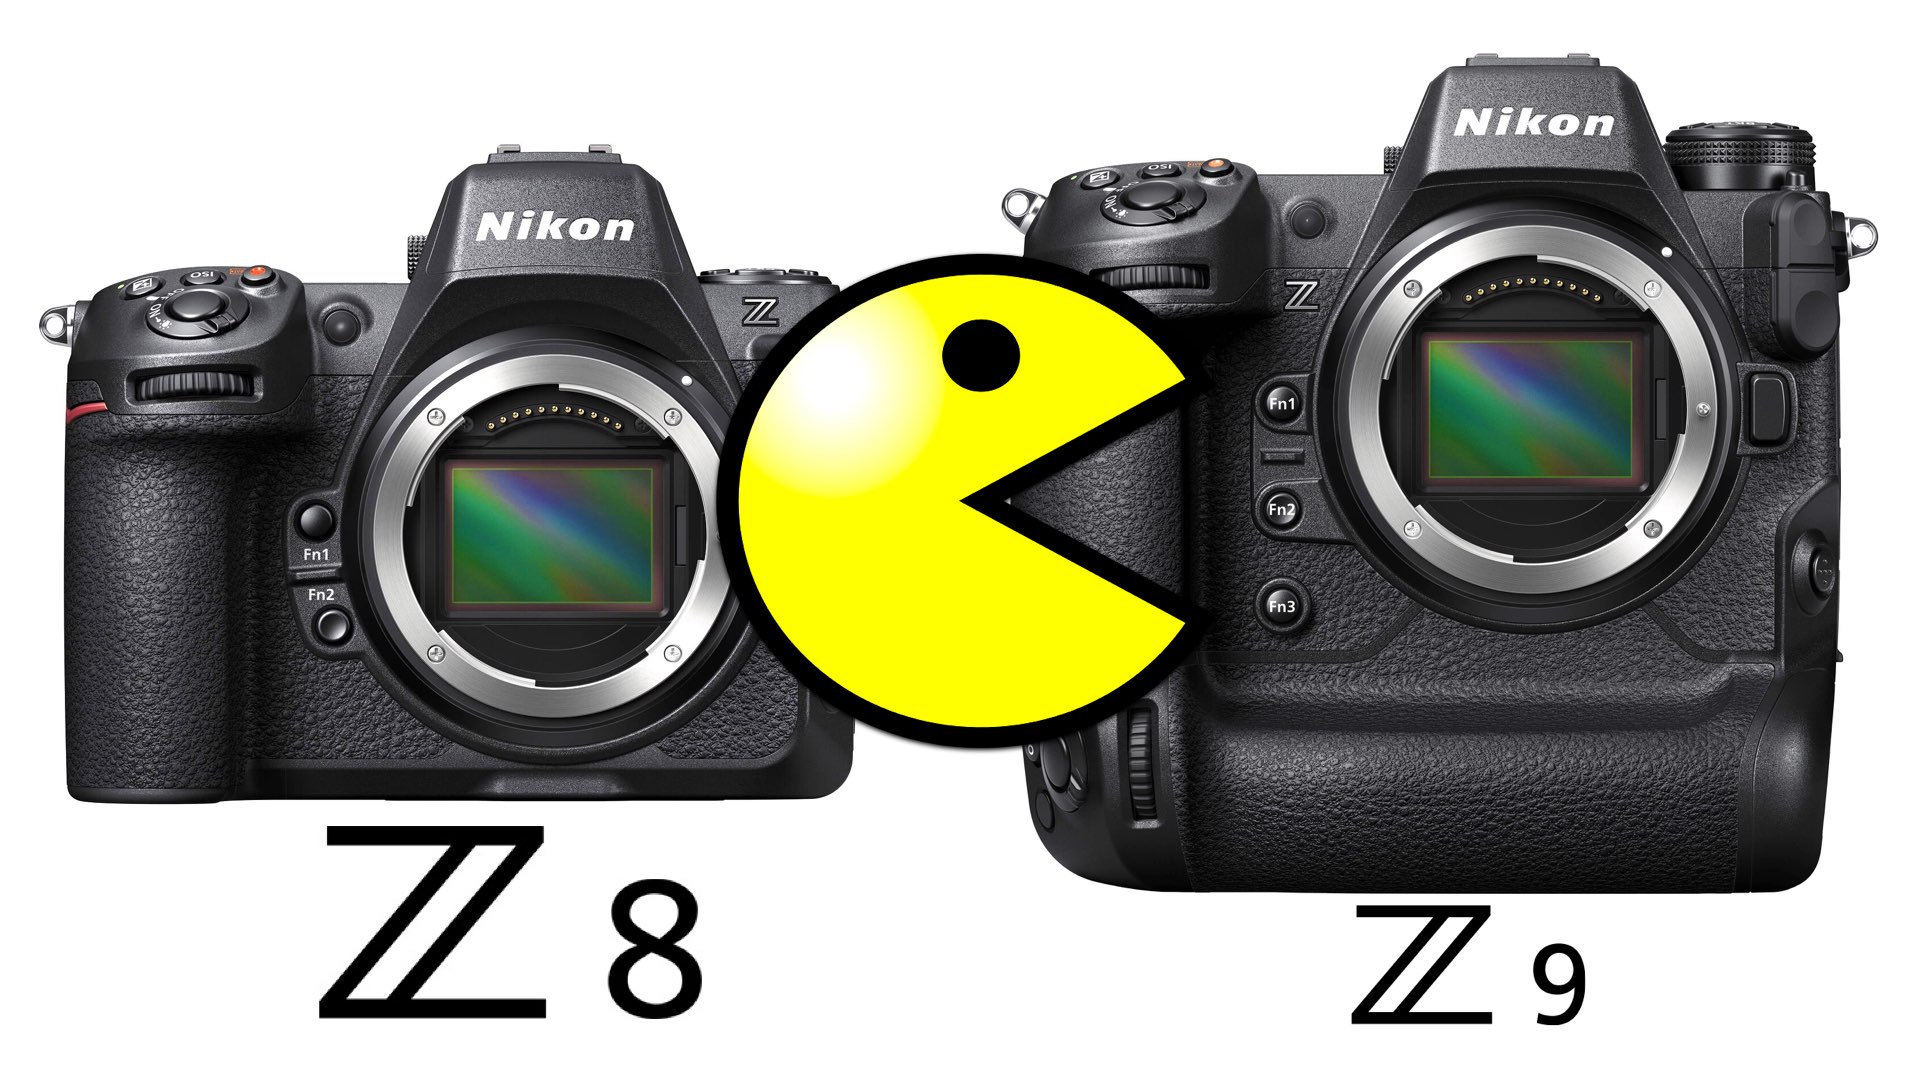 Nikon Has Just Killed its Flagship With the Z8